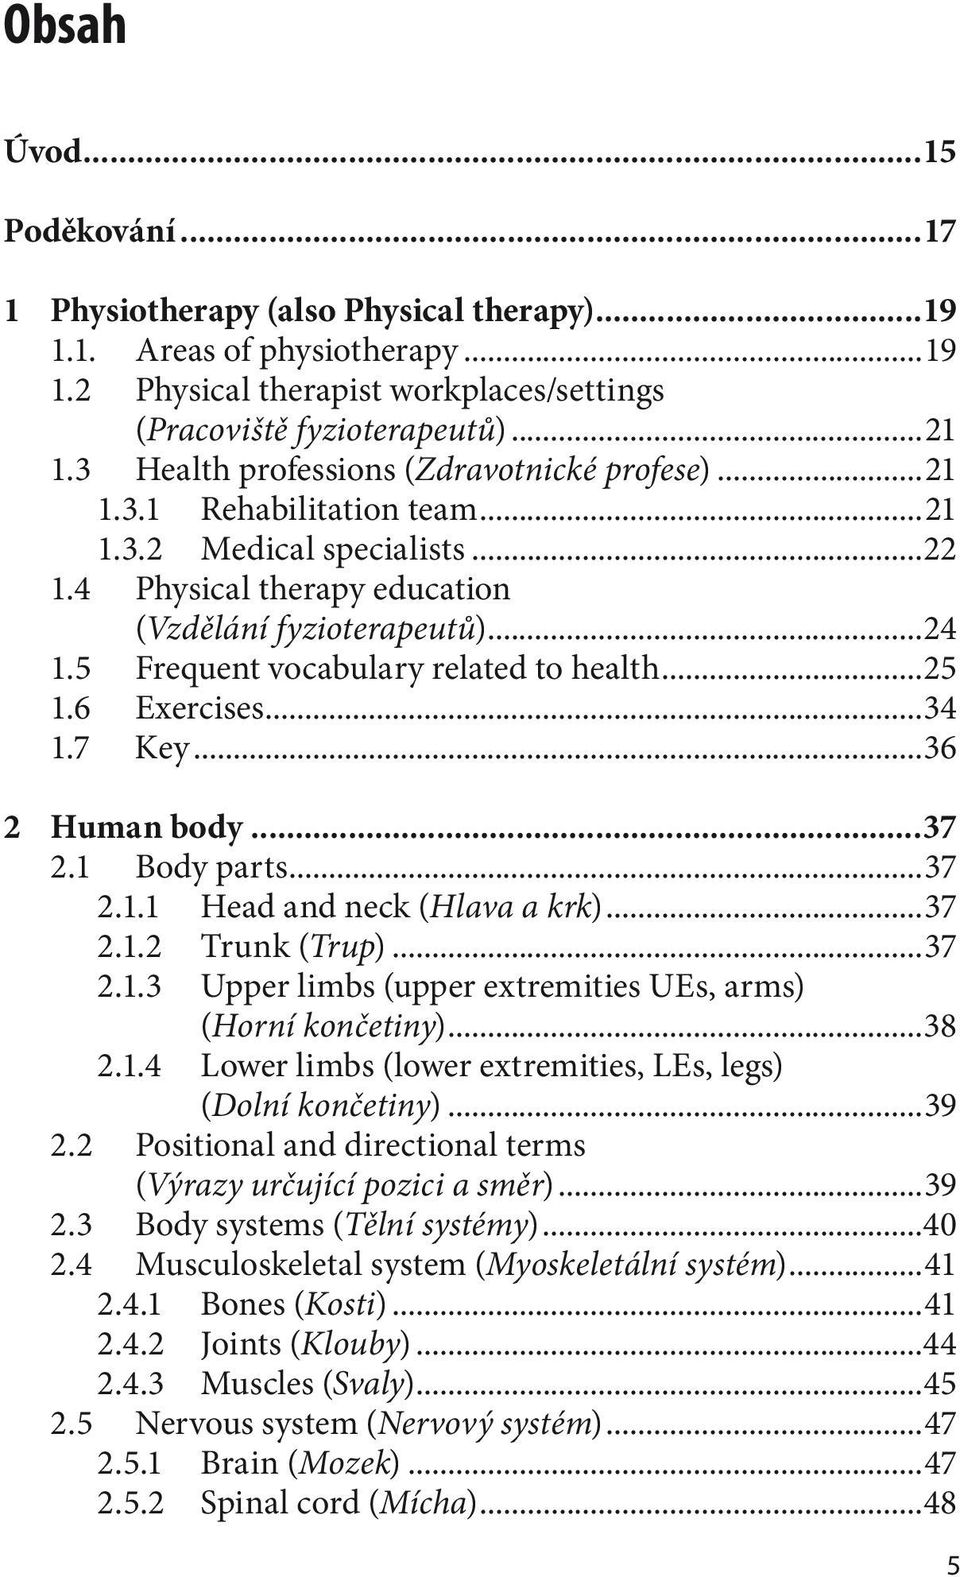 5 Frequent vocabulary related to health...25 1.6 Exercises...34 1.7 Key...36 2 Human body...37 2.1 Body parts...37 2.1.1 Head and neck (Hlava a krk)...37 2.1.2 Trunk (Trup)...37 2.1.3 Upper limbs (upper extremities UEs, arms) (Horní končetiny).